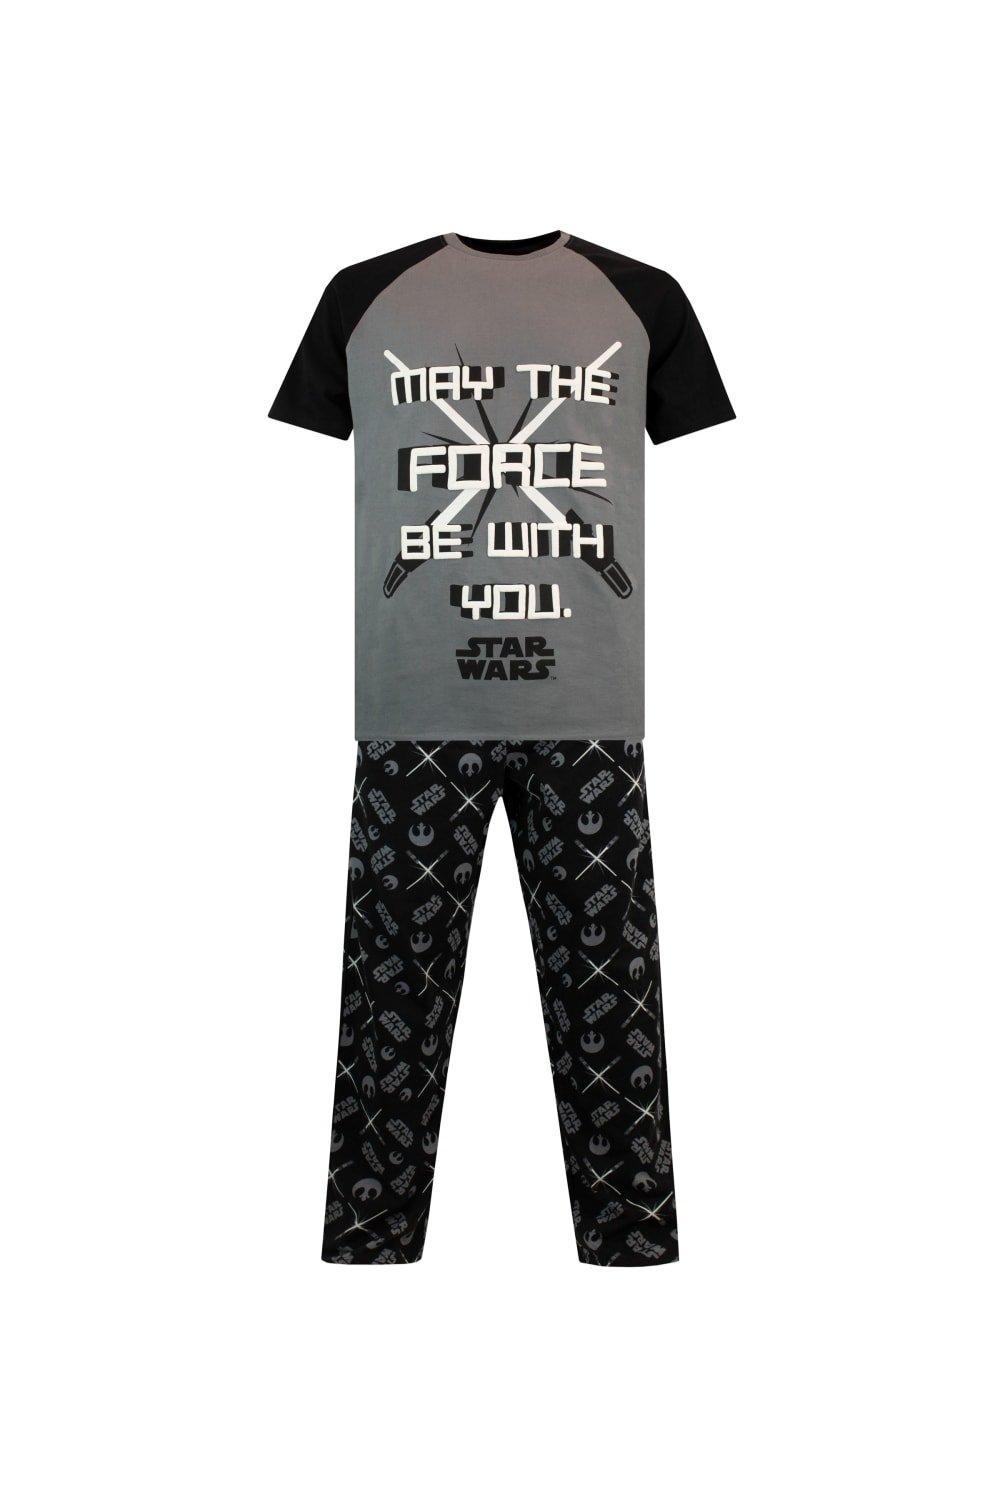 May The Force Be With You Pyjamas